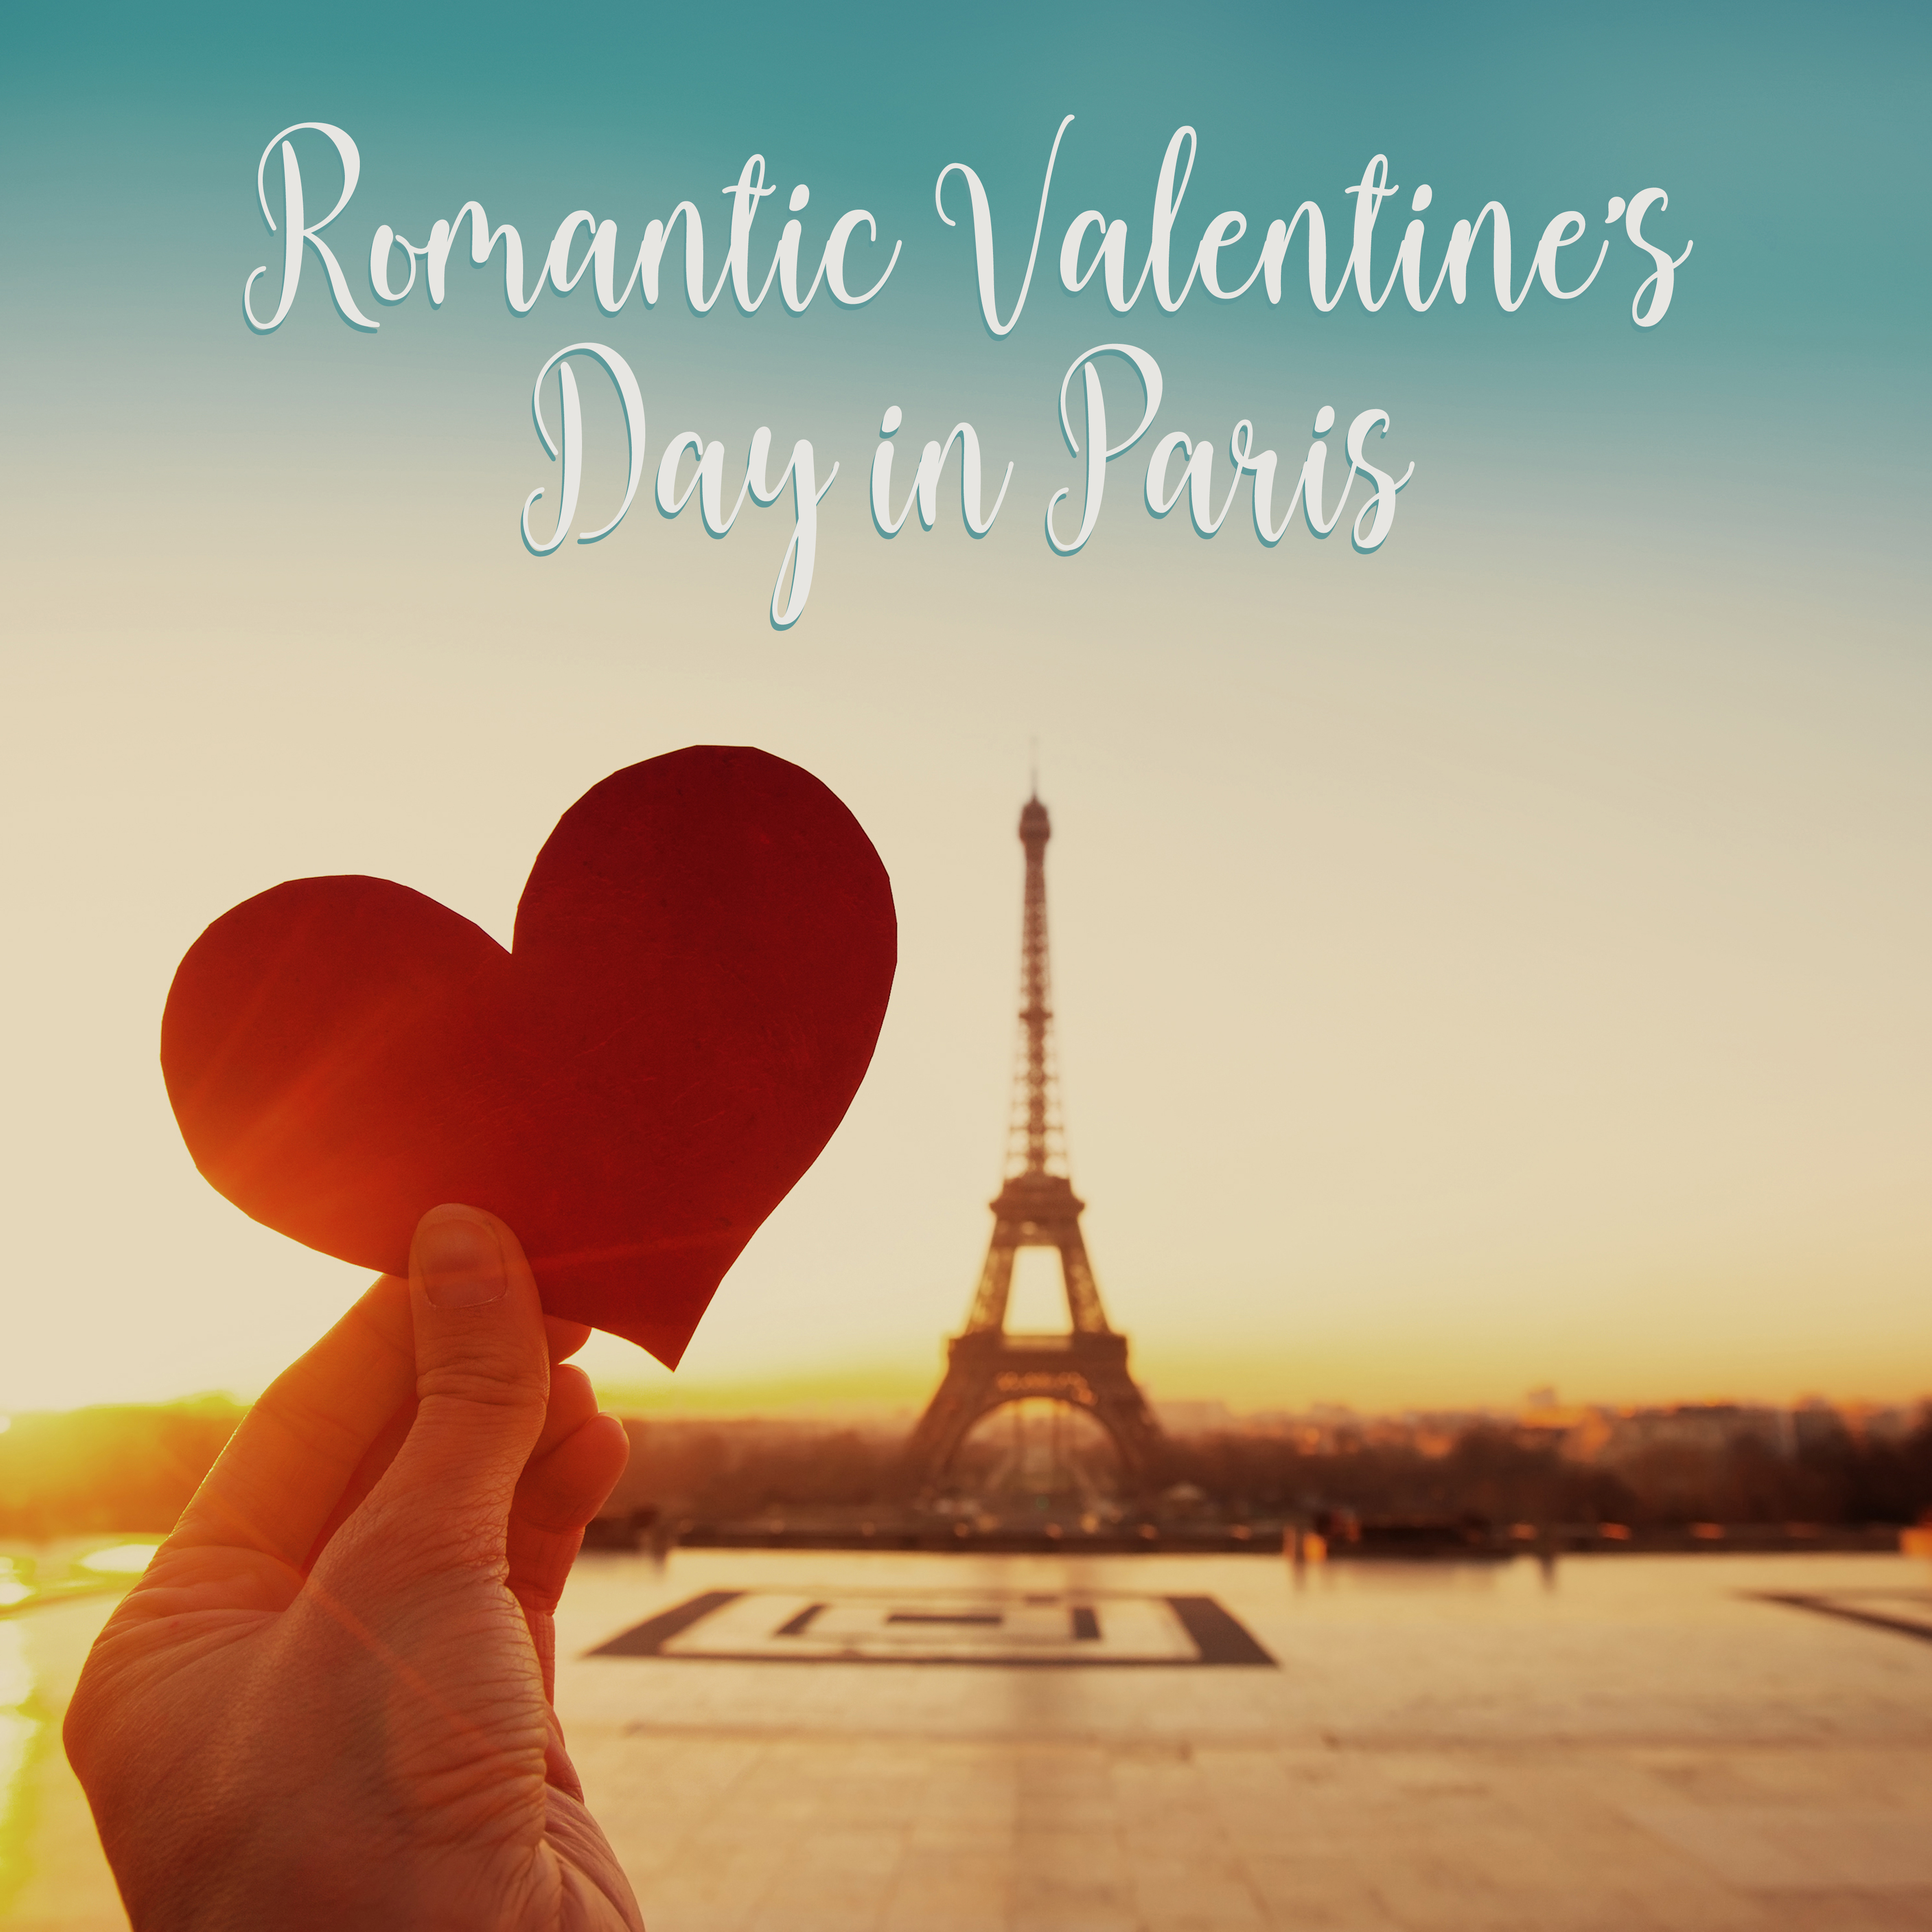 Romantic Valentine's Day in Paris – Piano Jazz Soft Melodies for Couples, Making Love Music 2019